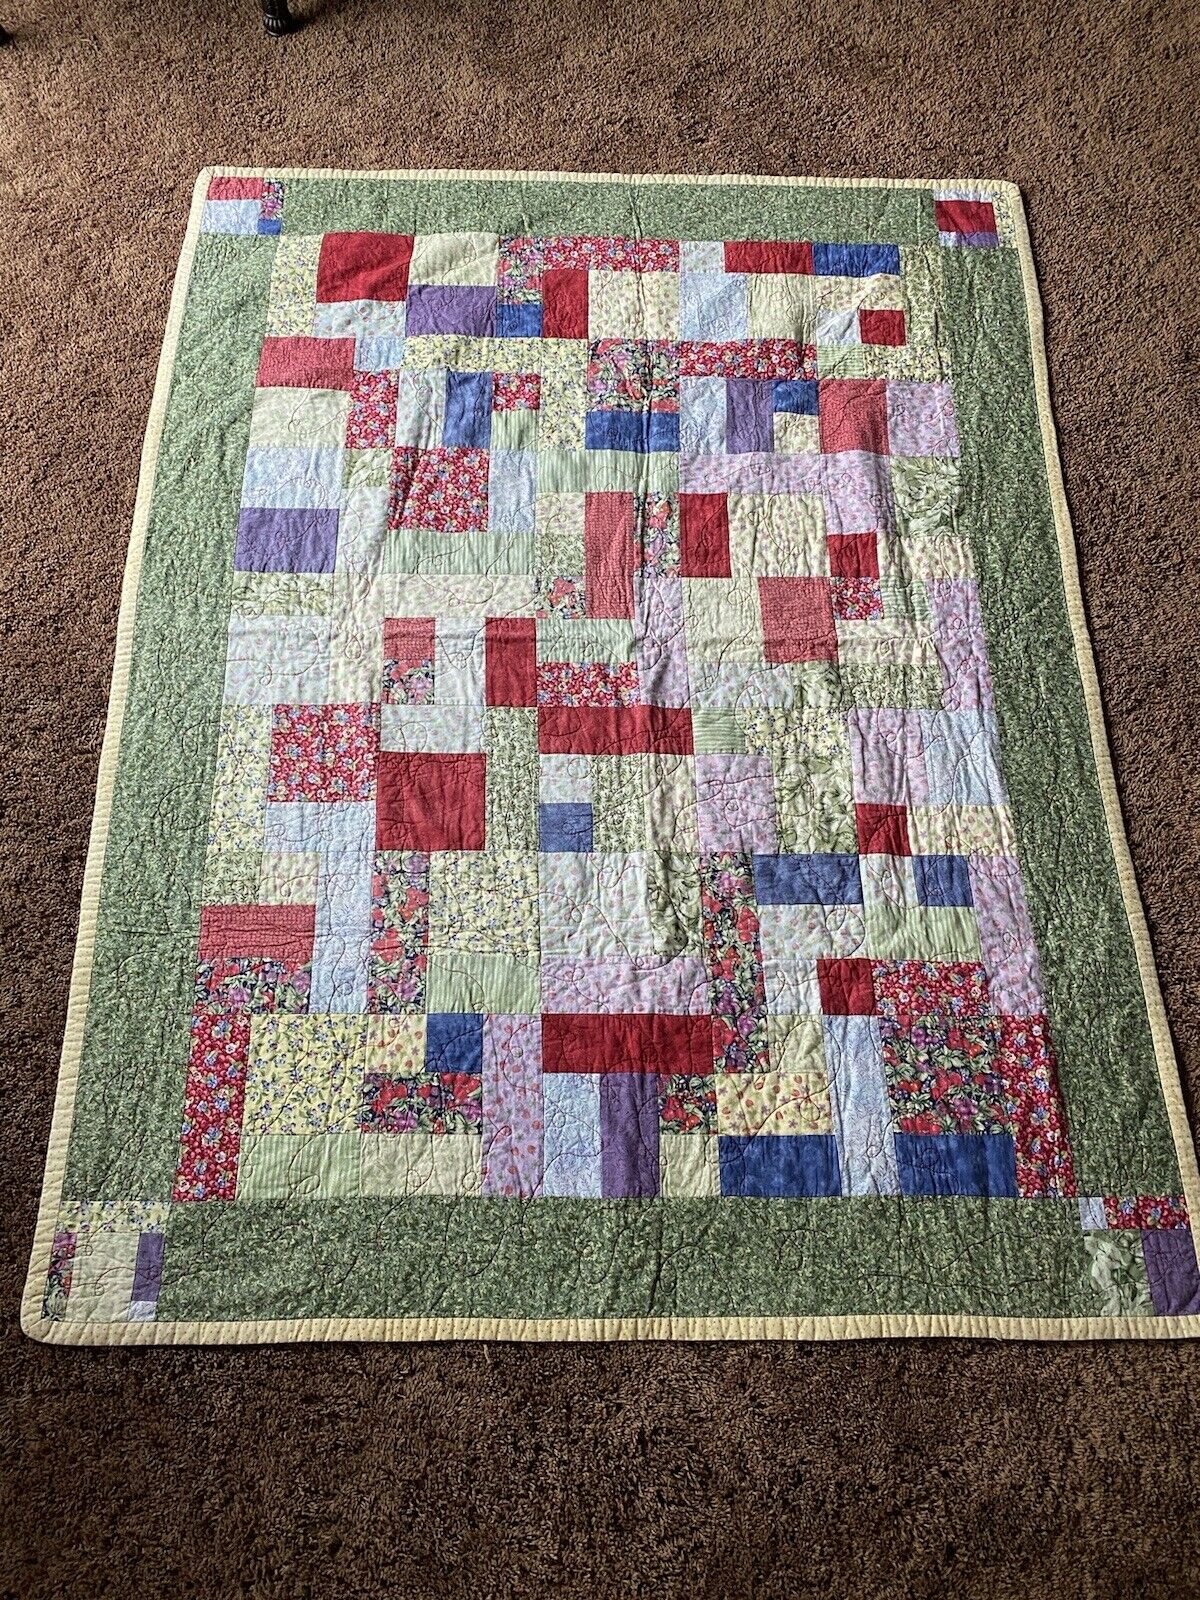 Quilt Vibrant Colors 52 X 68 In  Lap Throw Blanket